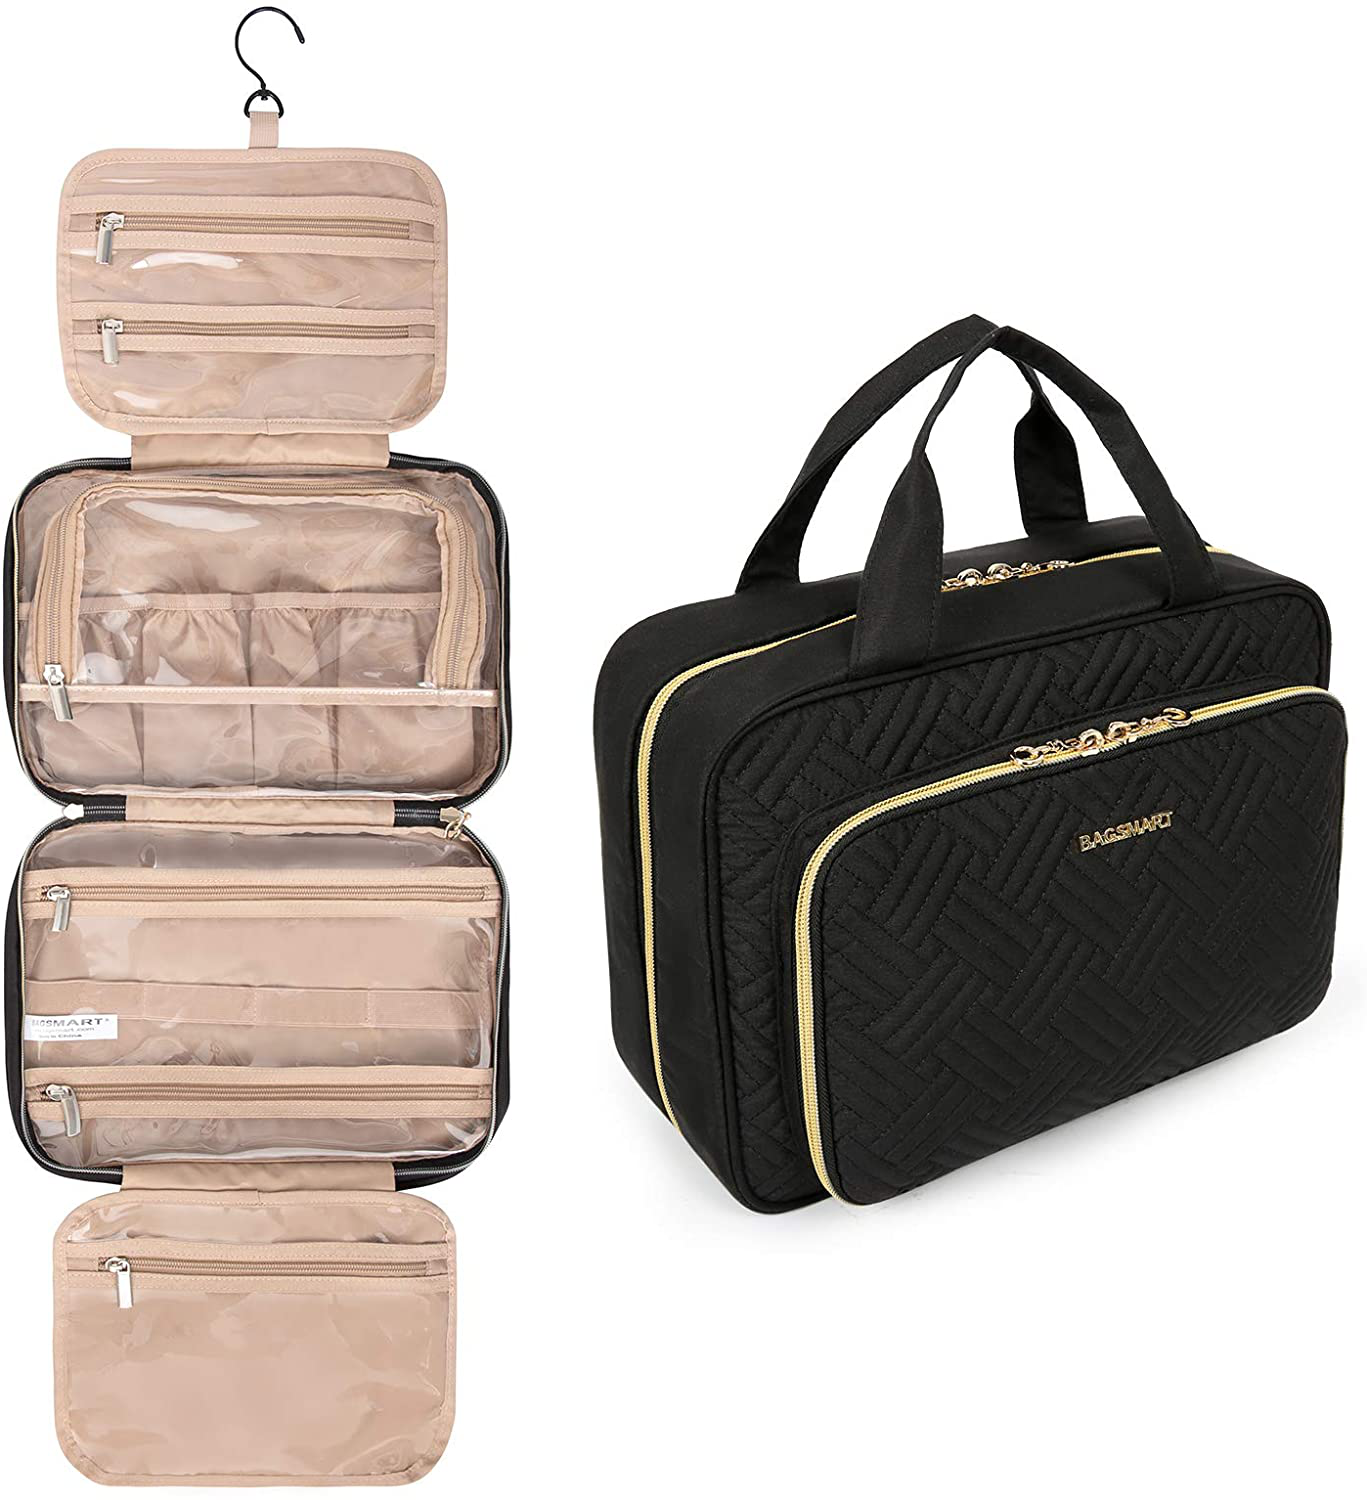 BAGSMART Toiletry Bag Hanging Travel Makeup Organizer with TSA Approved Transparent Cosmetic Bag Makeup Bag for Full Sized Toiletries